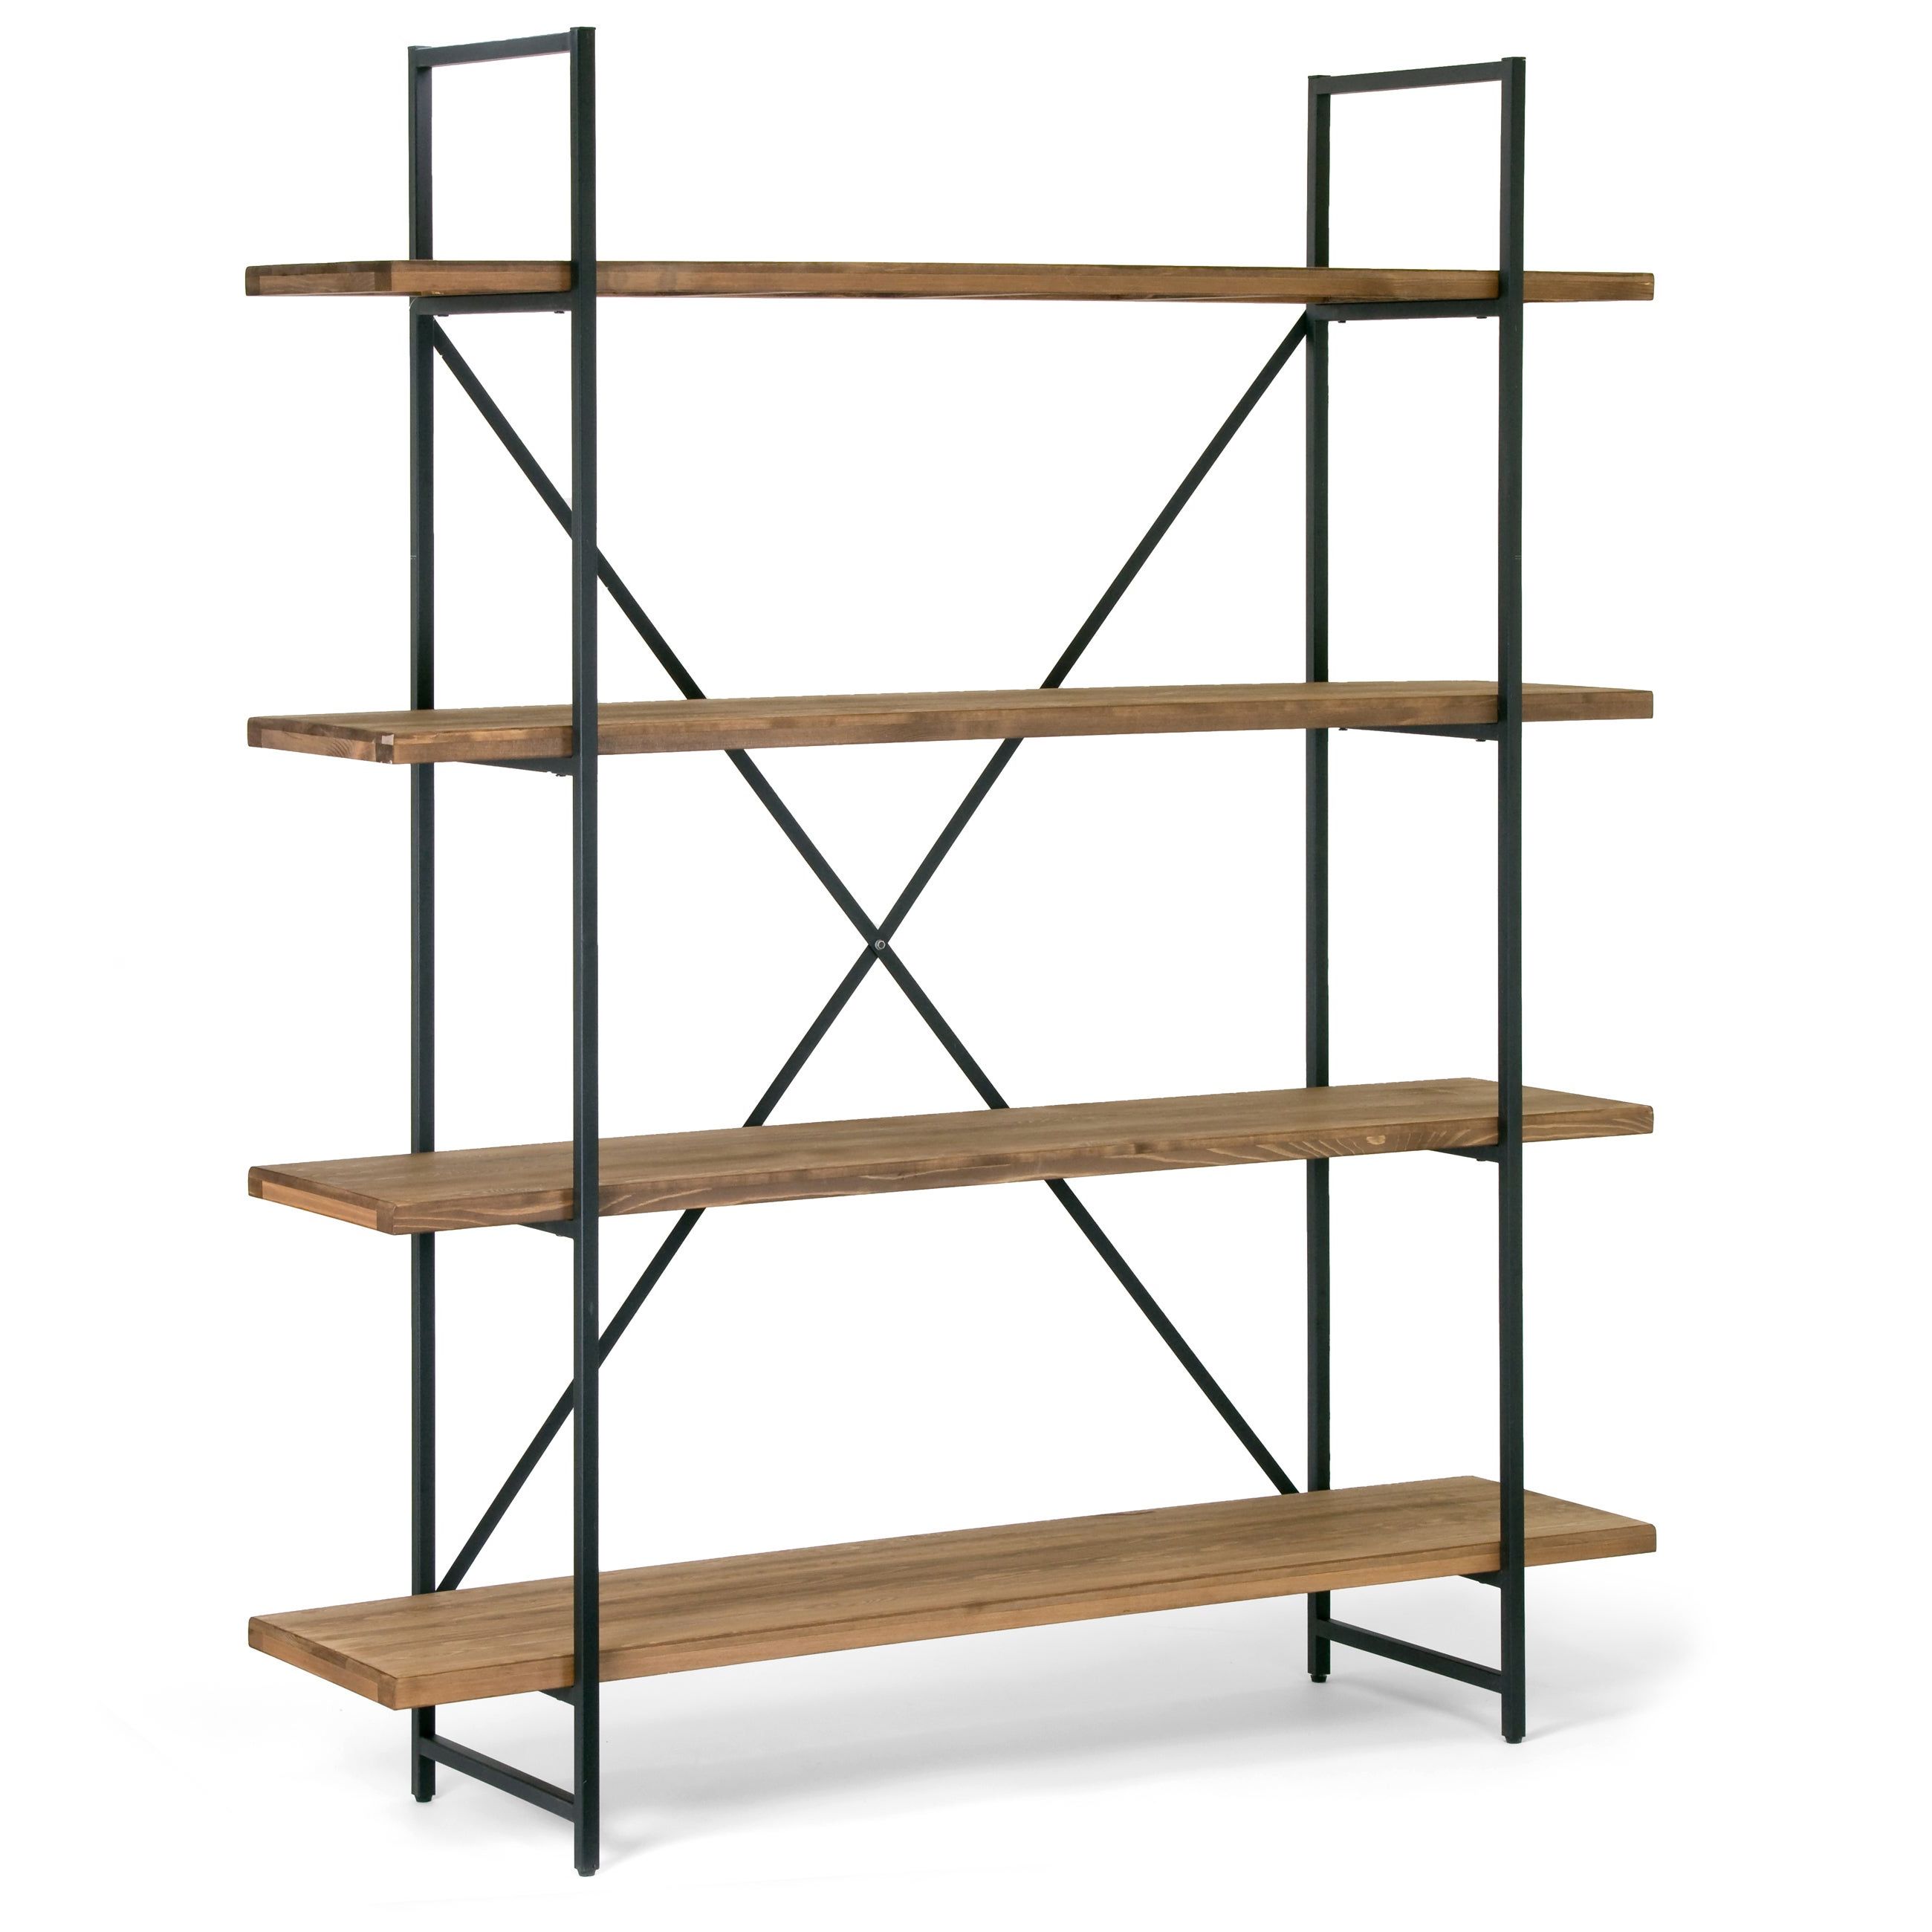 Parker Modern Etagere Bookcases Within Well Liked Buy Etagere Bookshelves & Bookcases Online At Overstock (View 10 of 20)